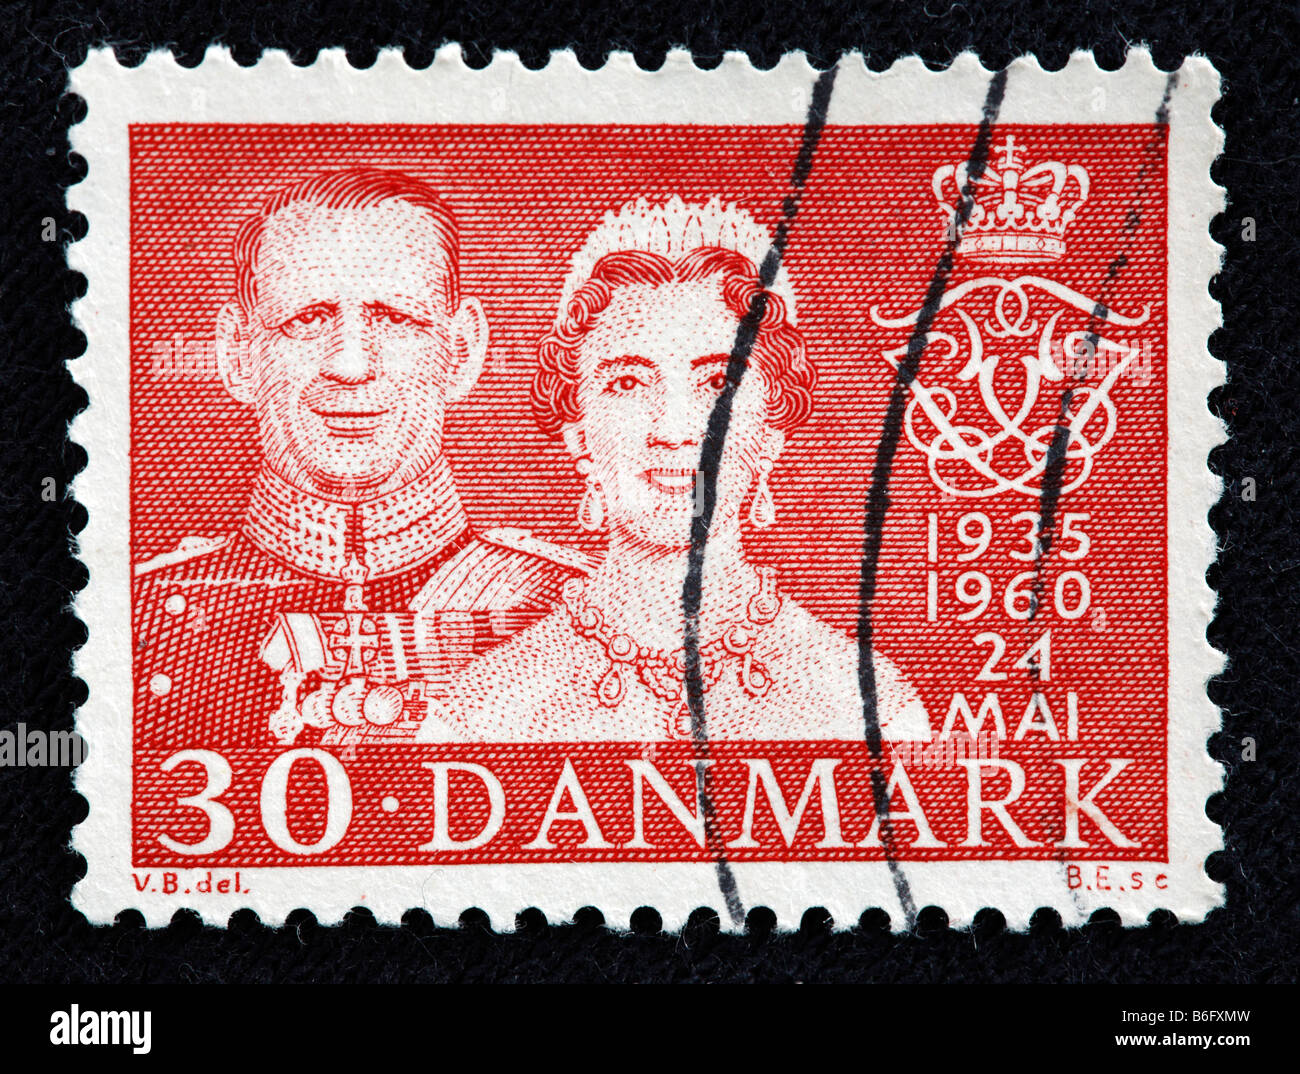 Silver jubilee of weeding of Frederick IX, King of Denmark and Iceland (1947-1972) and Ingrid of Sweden, stamp, Denmark, 1960 Stock Photo